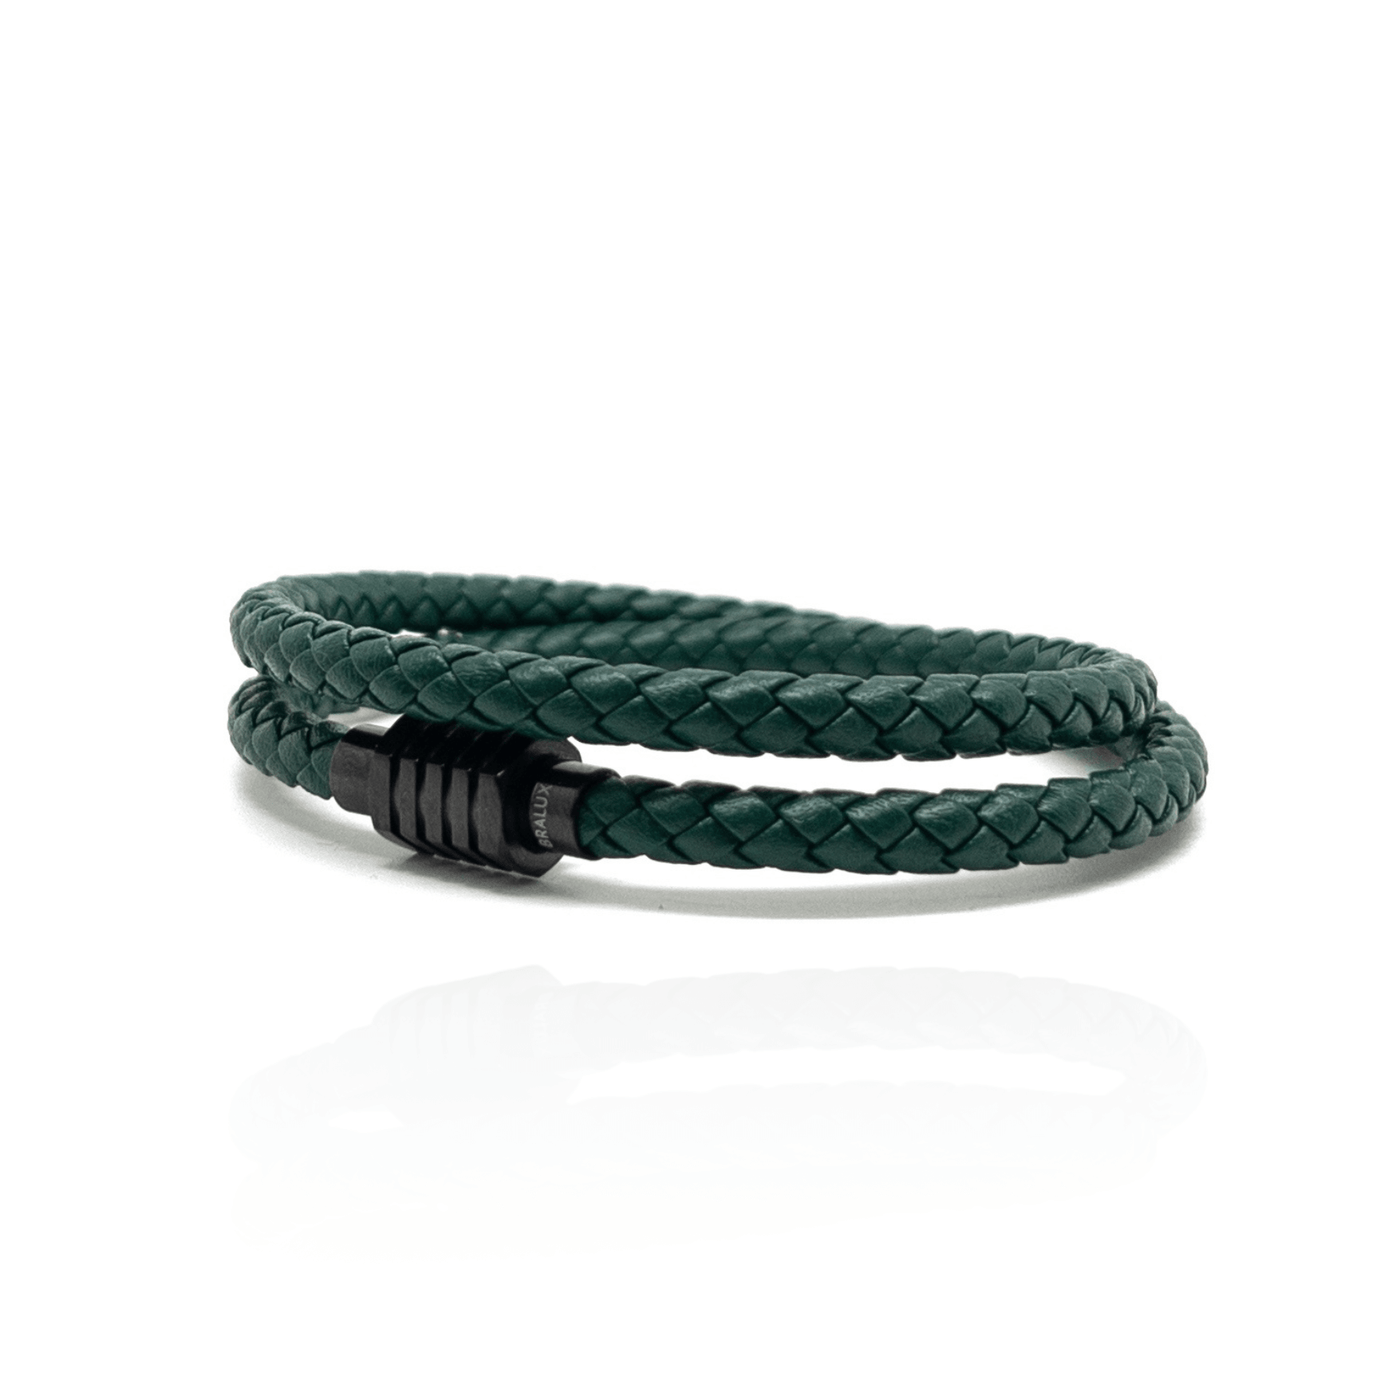 The Green duo and Black Plated Buckle Leather bracelet